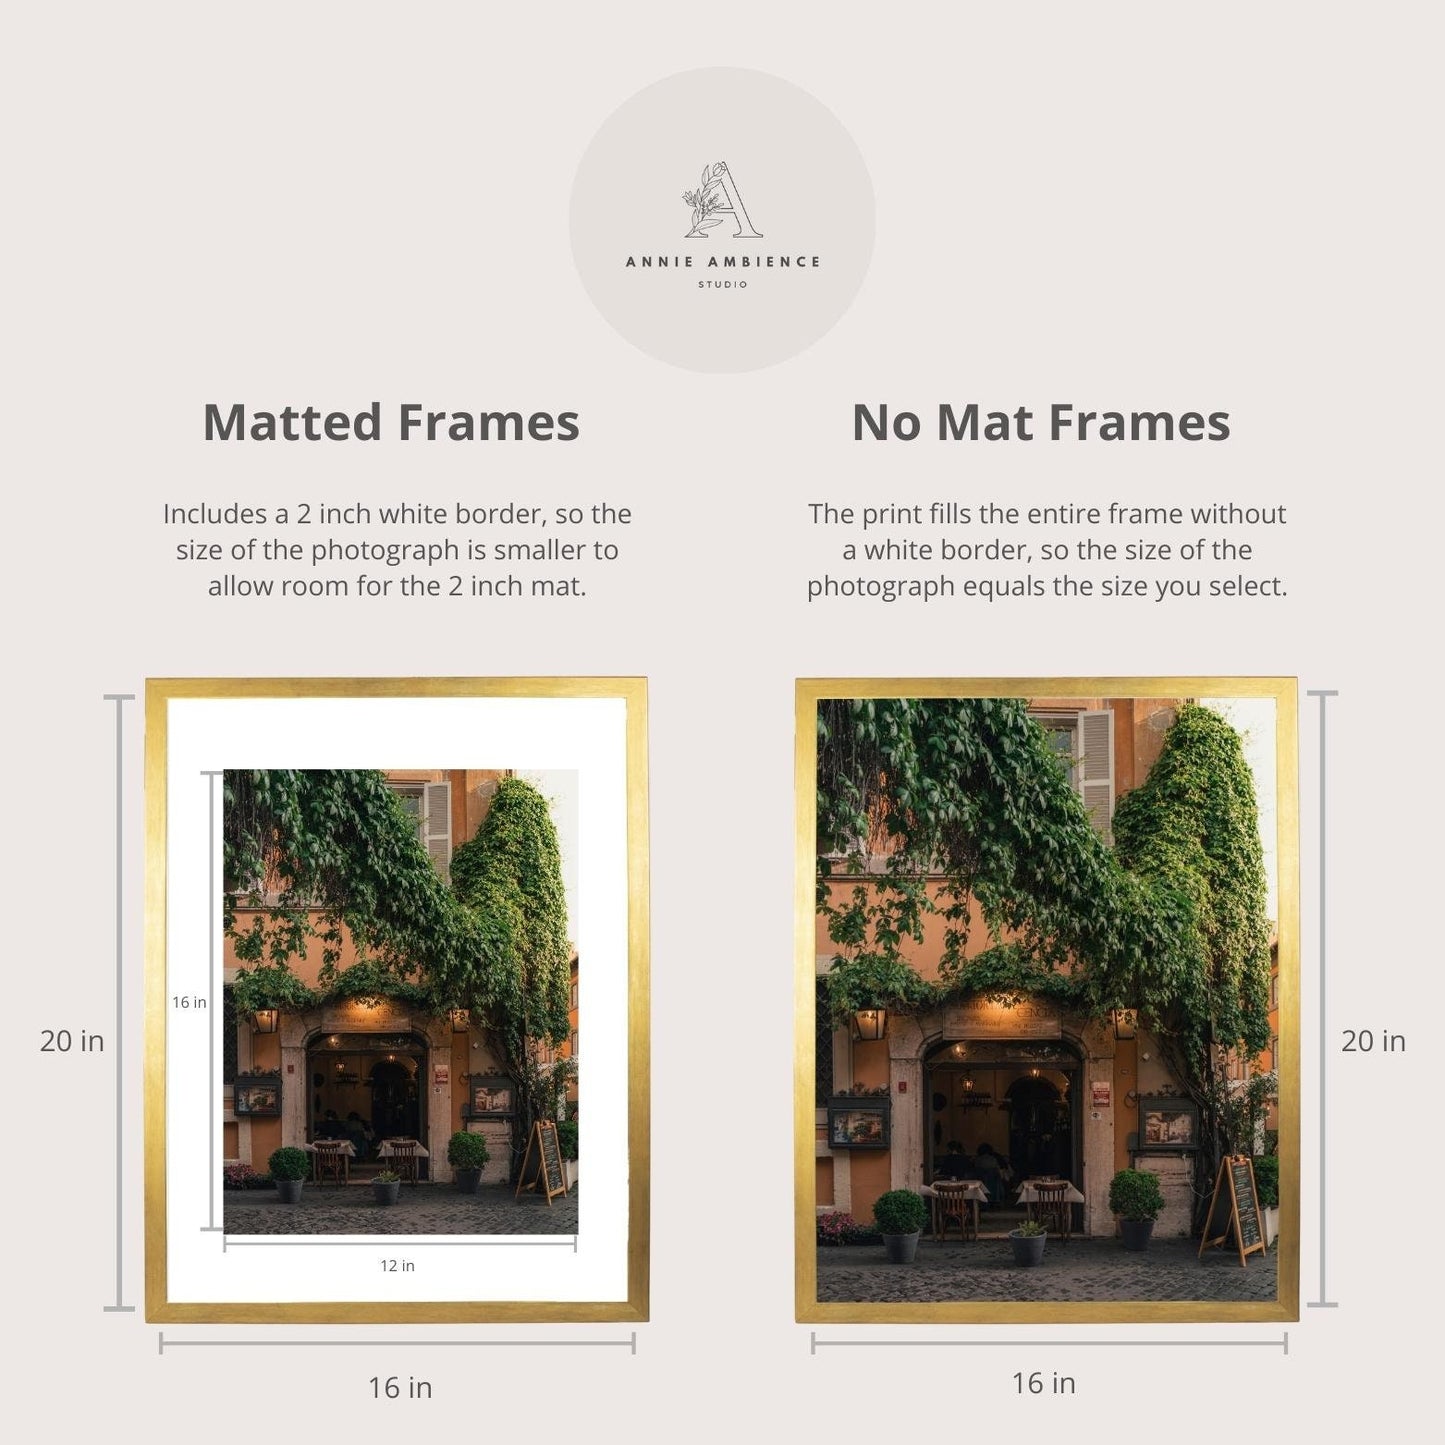 Choose matted or no mat frames: Matted frames include a 2 inch white border, so the size of the photograph is smaller to allow room for the 2 inch mat. No Mat frames do not have a white border, so the size of the photograph equals the size you select.